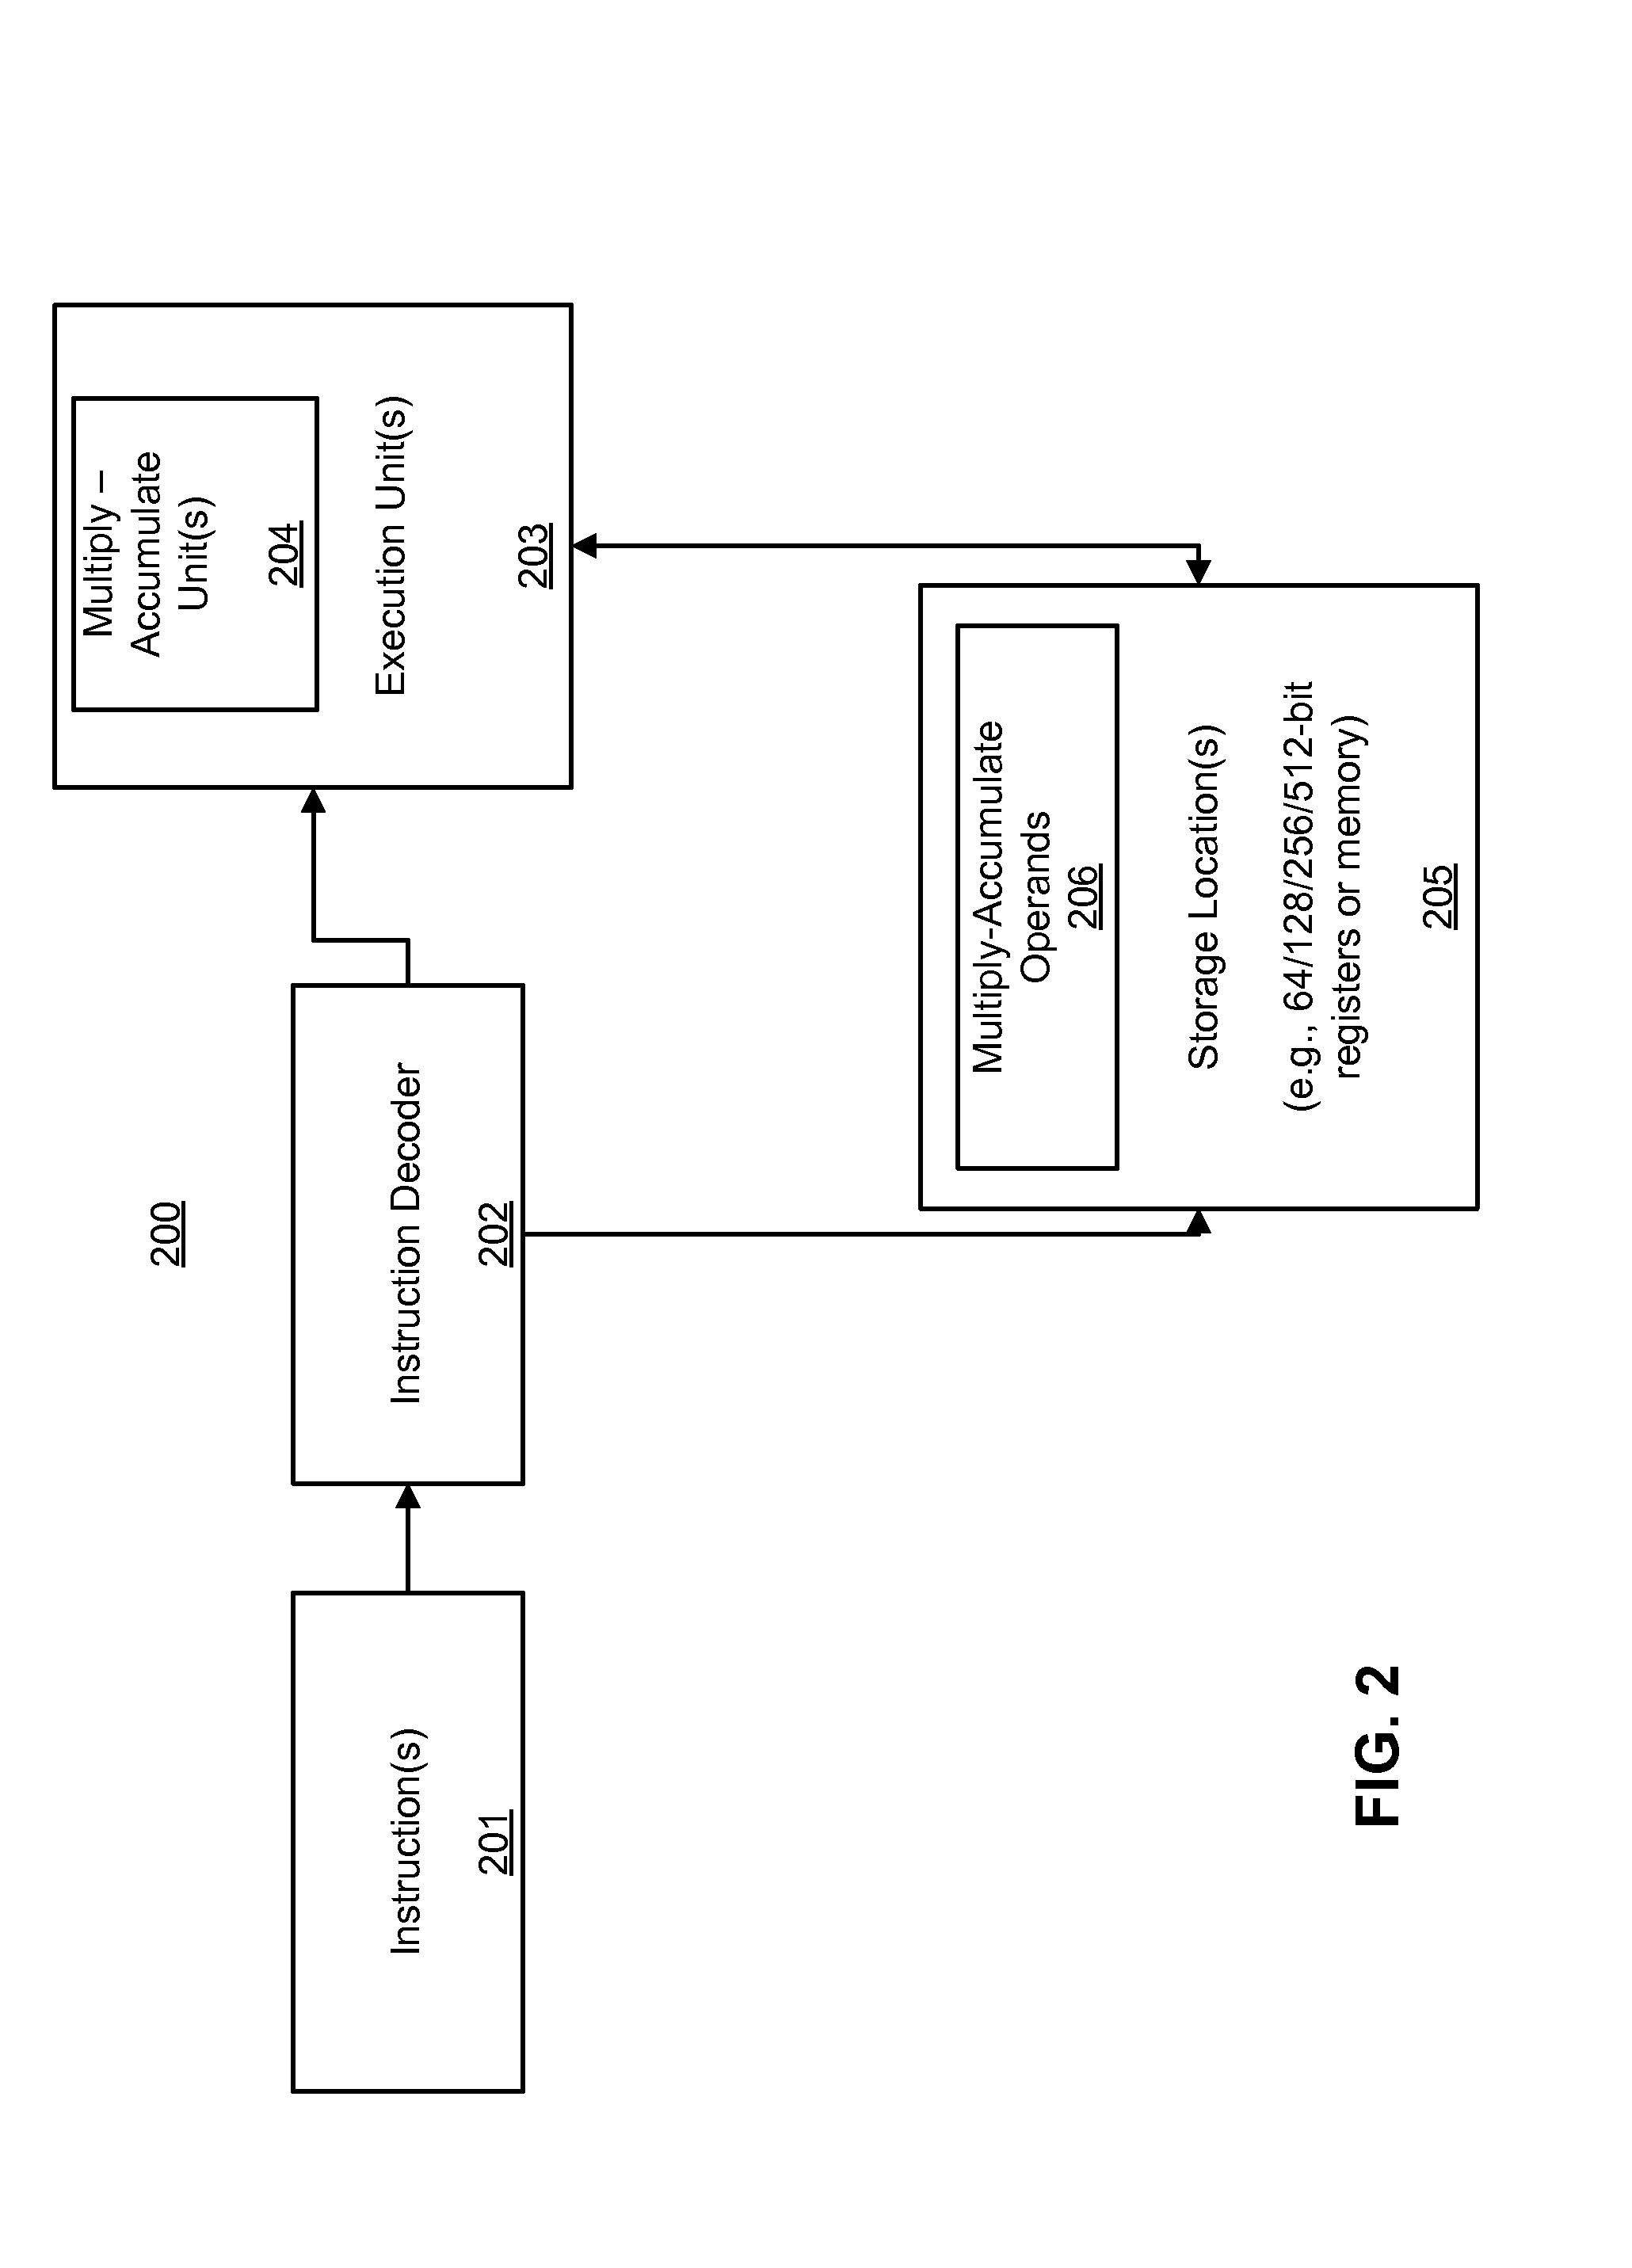 Method and apparatus to process 4-operand SIMD integer multiply-accumulate instruction